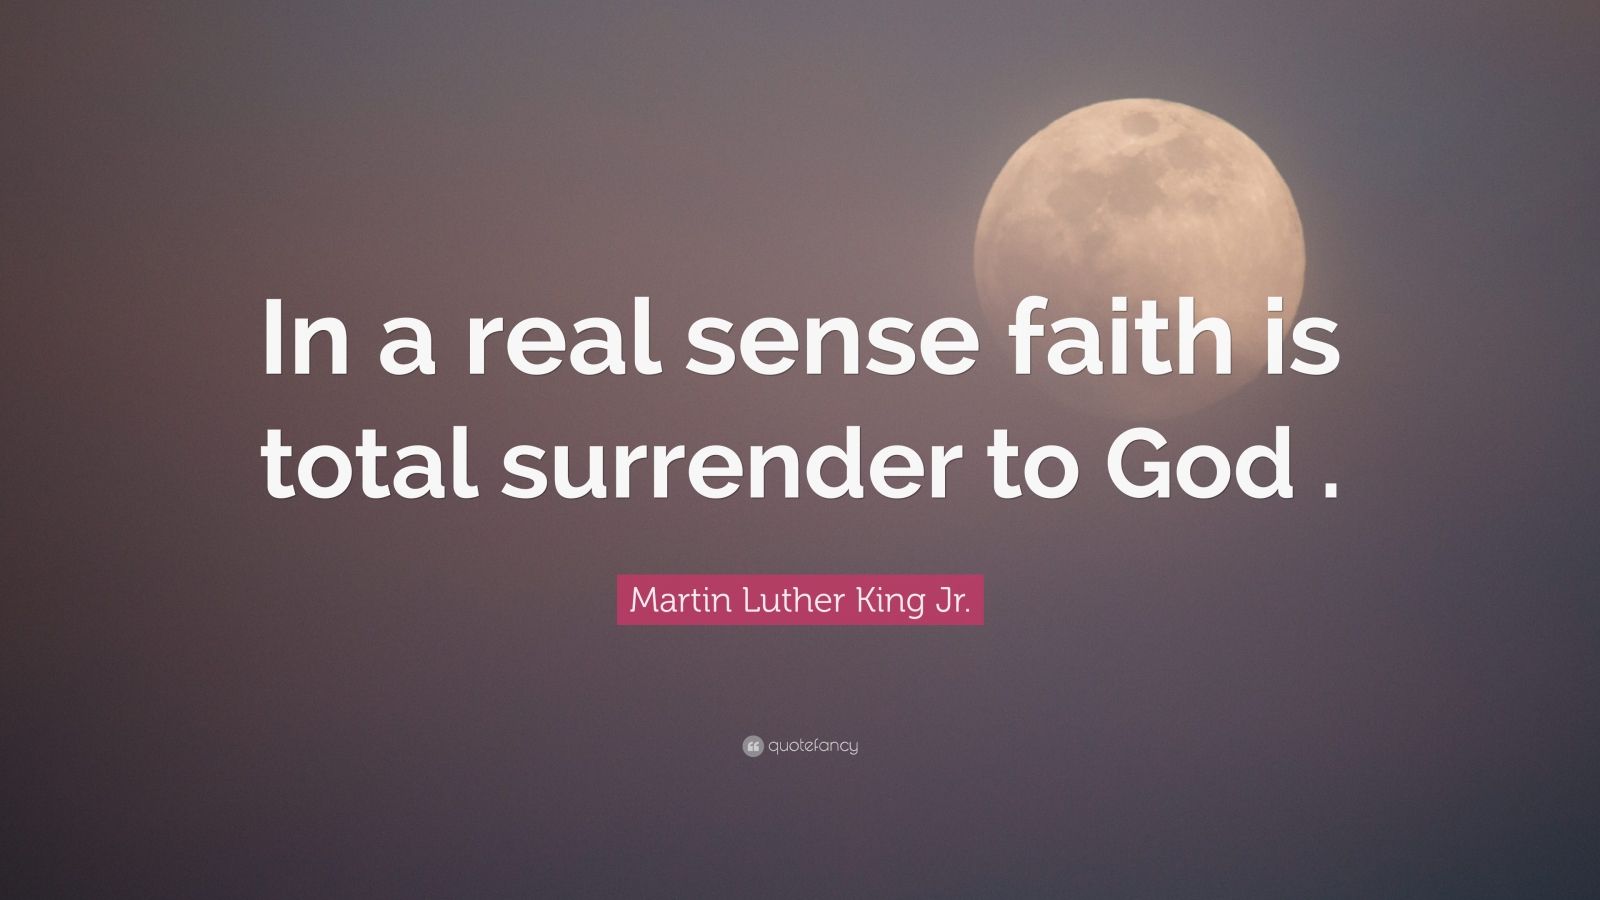 Martin Luther King Jr. Quote: “In a real sense faith is total surrender ...